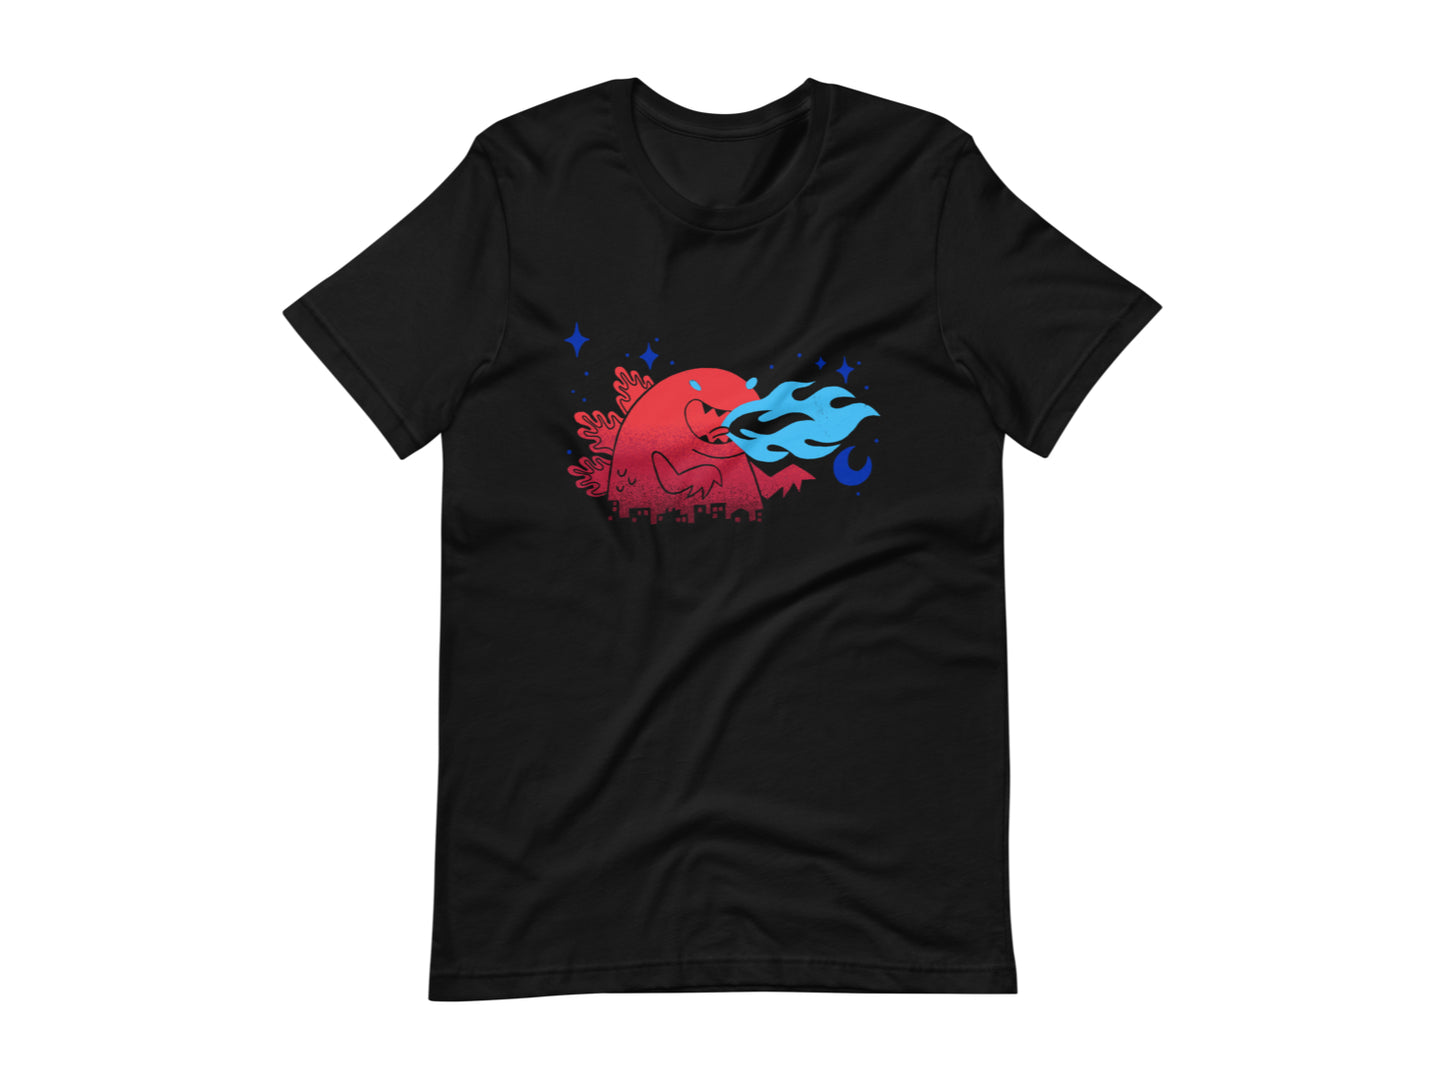 T-shirt with block print style art by Amber Orenstein. Black shirt with a red godzilla, blue stars, and light blue flames coming from his mouth.